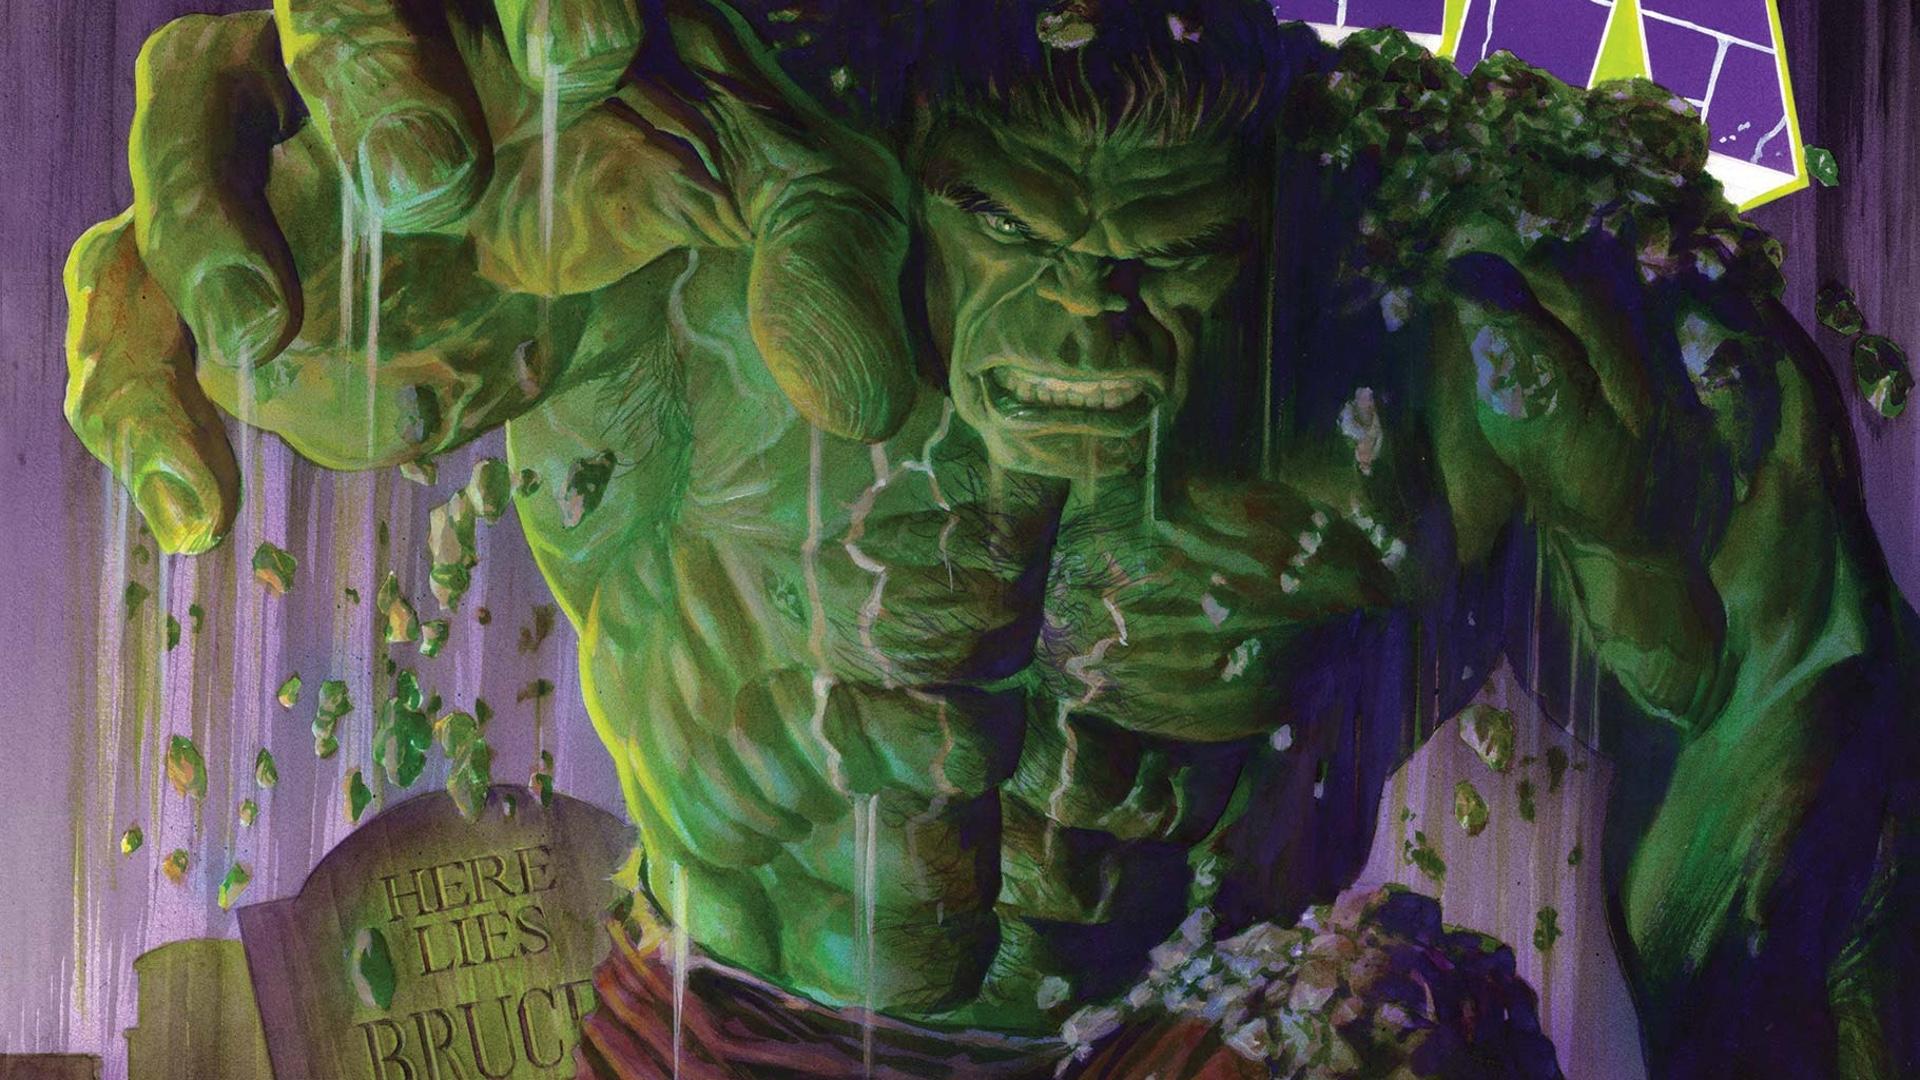 Bruce Banner is No Longer The Most Powerful Hulk in The Marvel